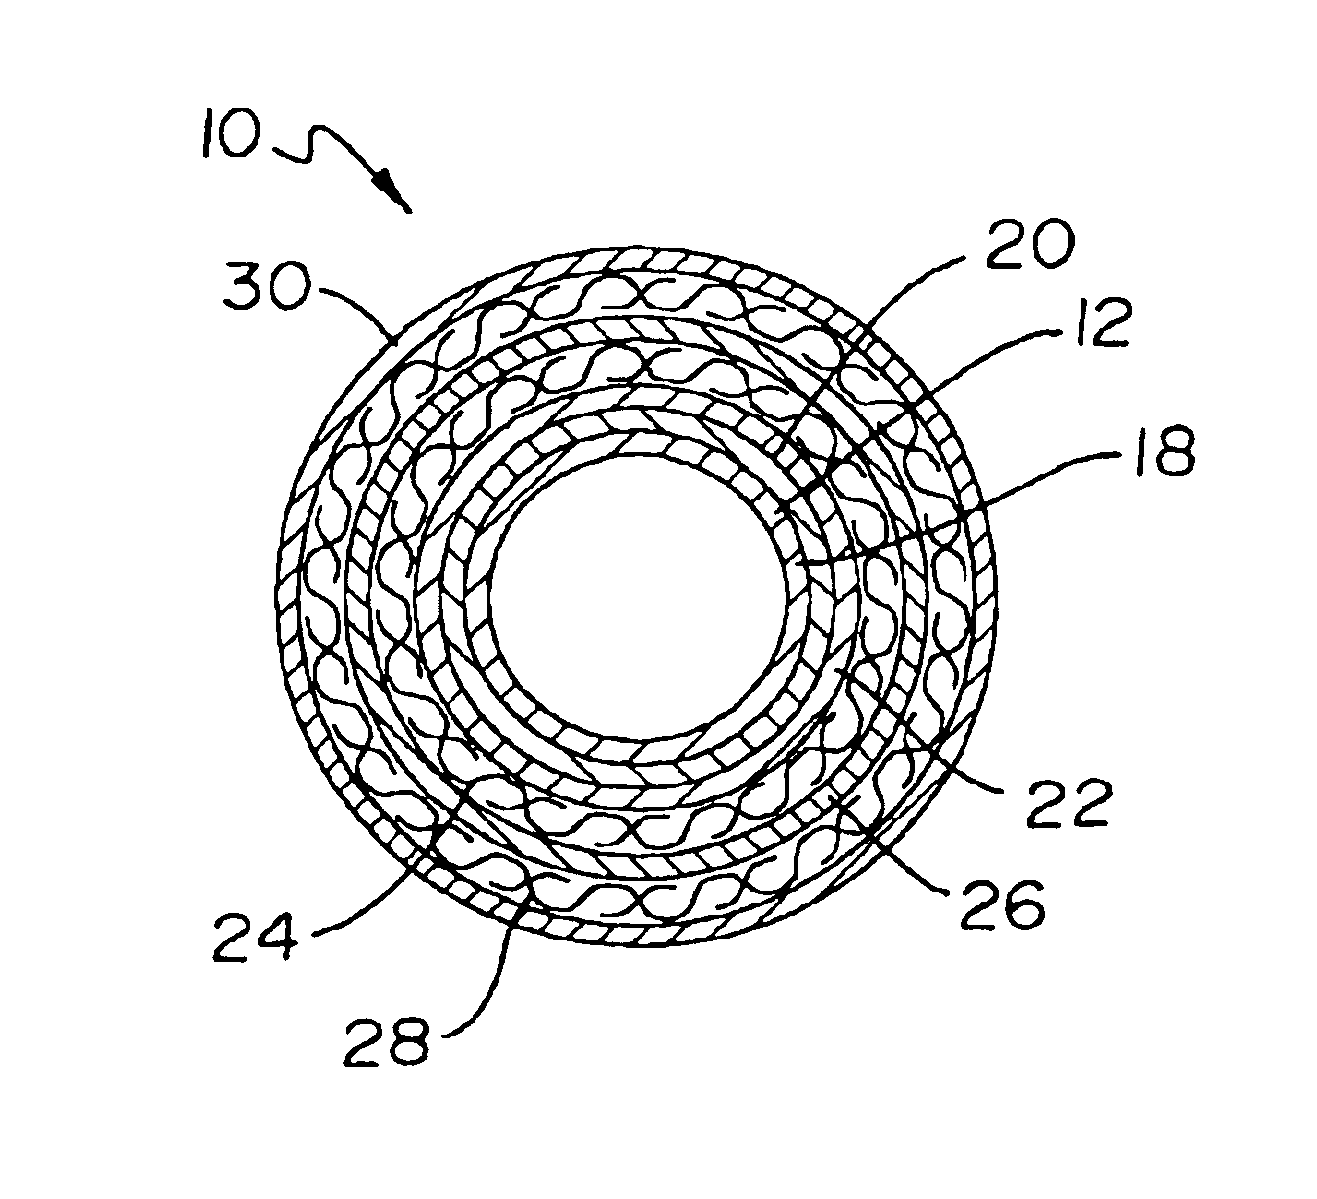 Catheter incorporating a curable polymer layer to control flexibility and method of manufacture